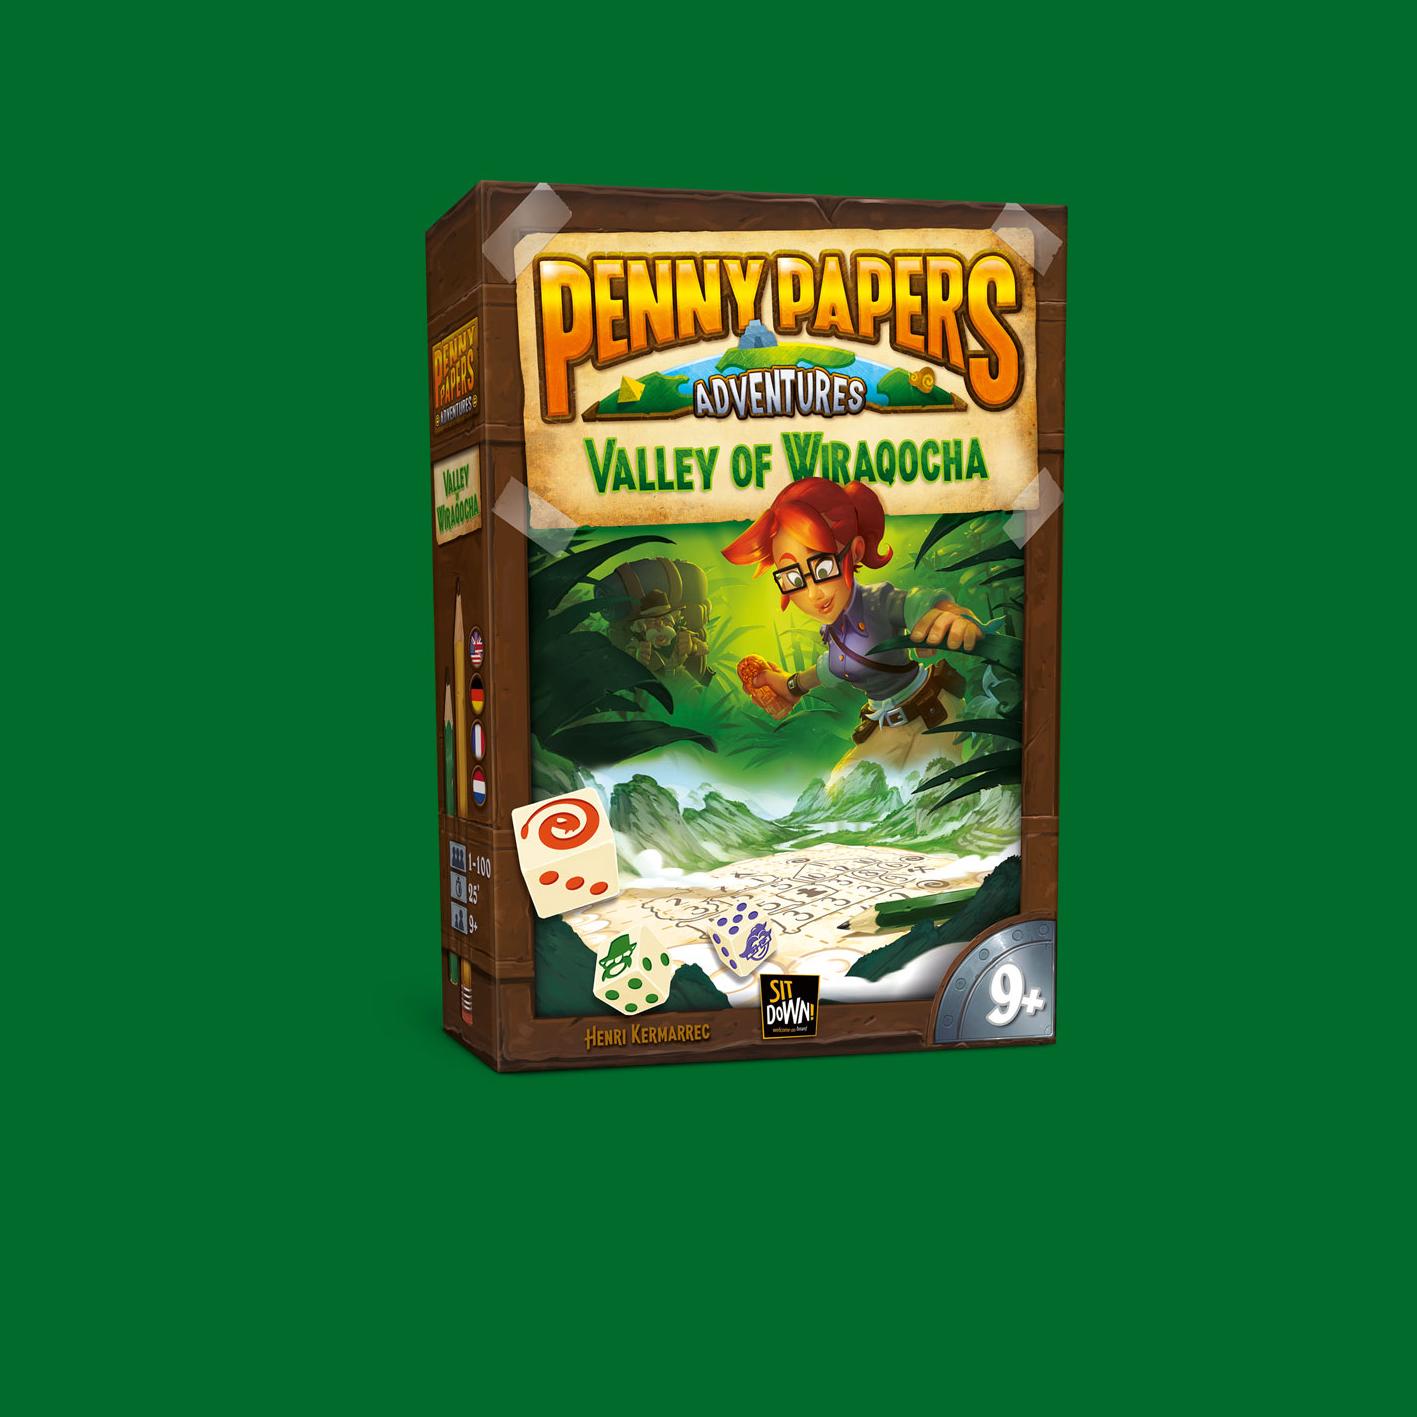 Penny papers Adventures - Valley of Wiraqocha box